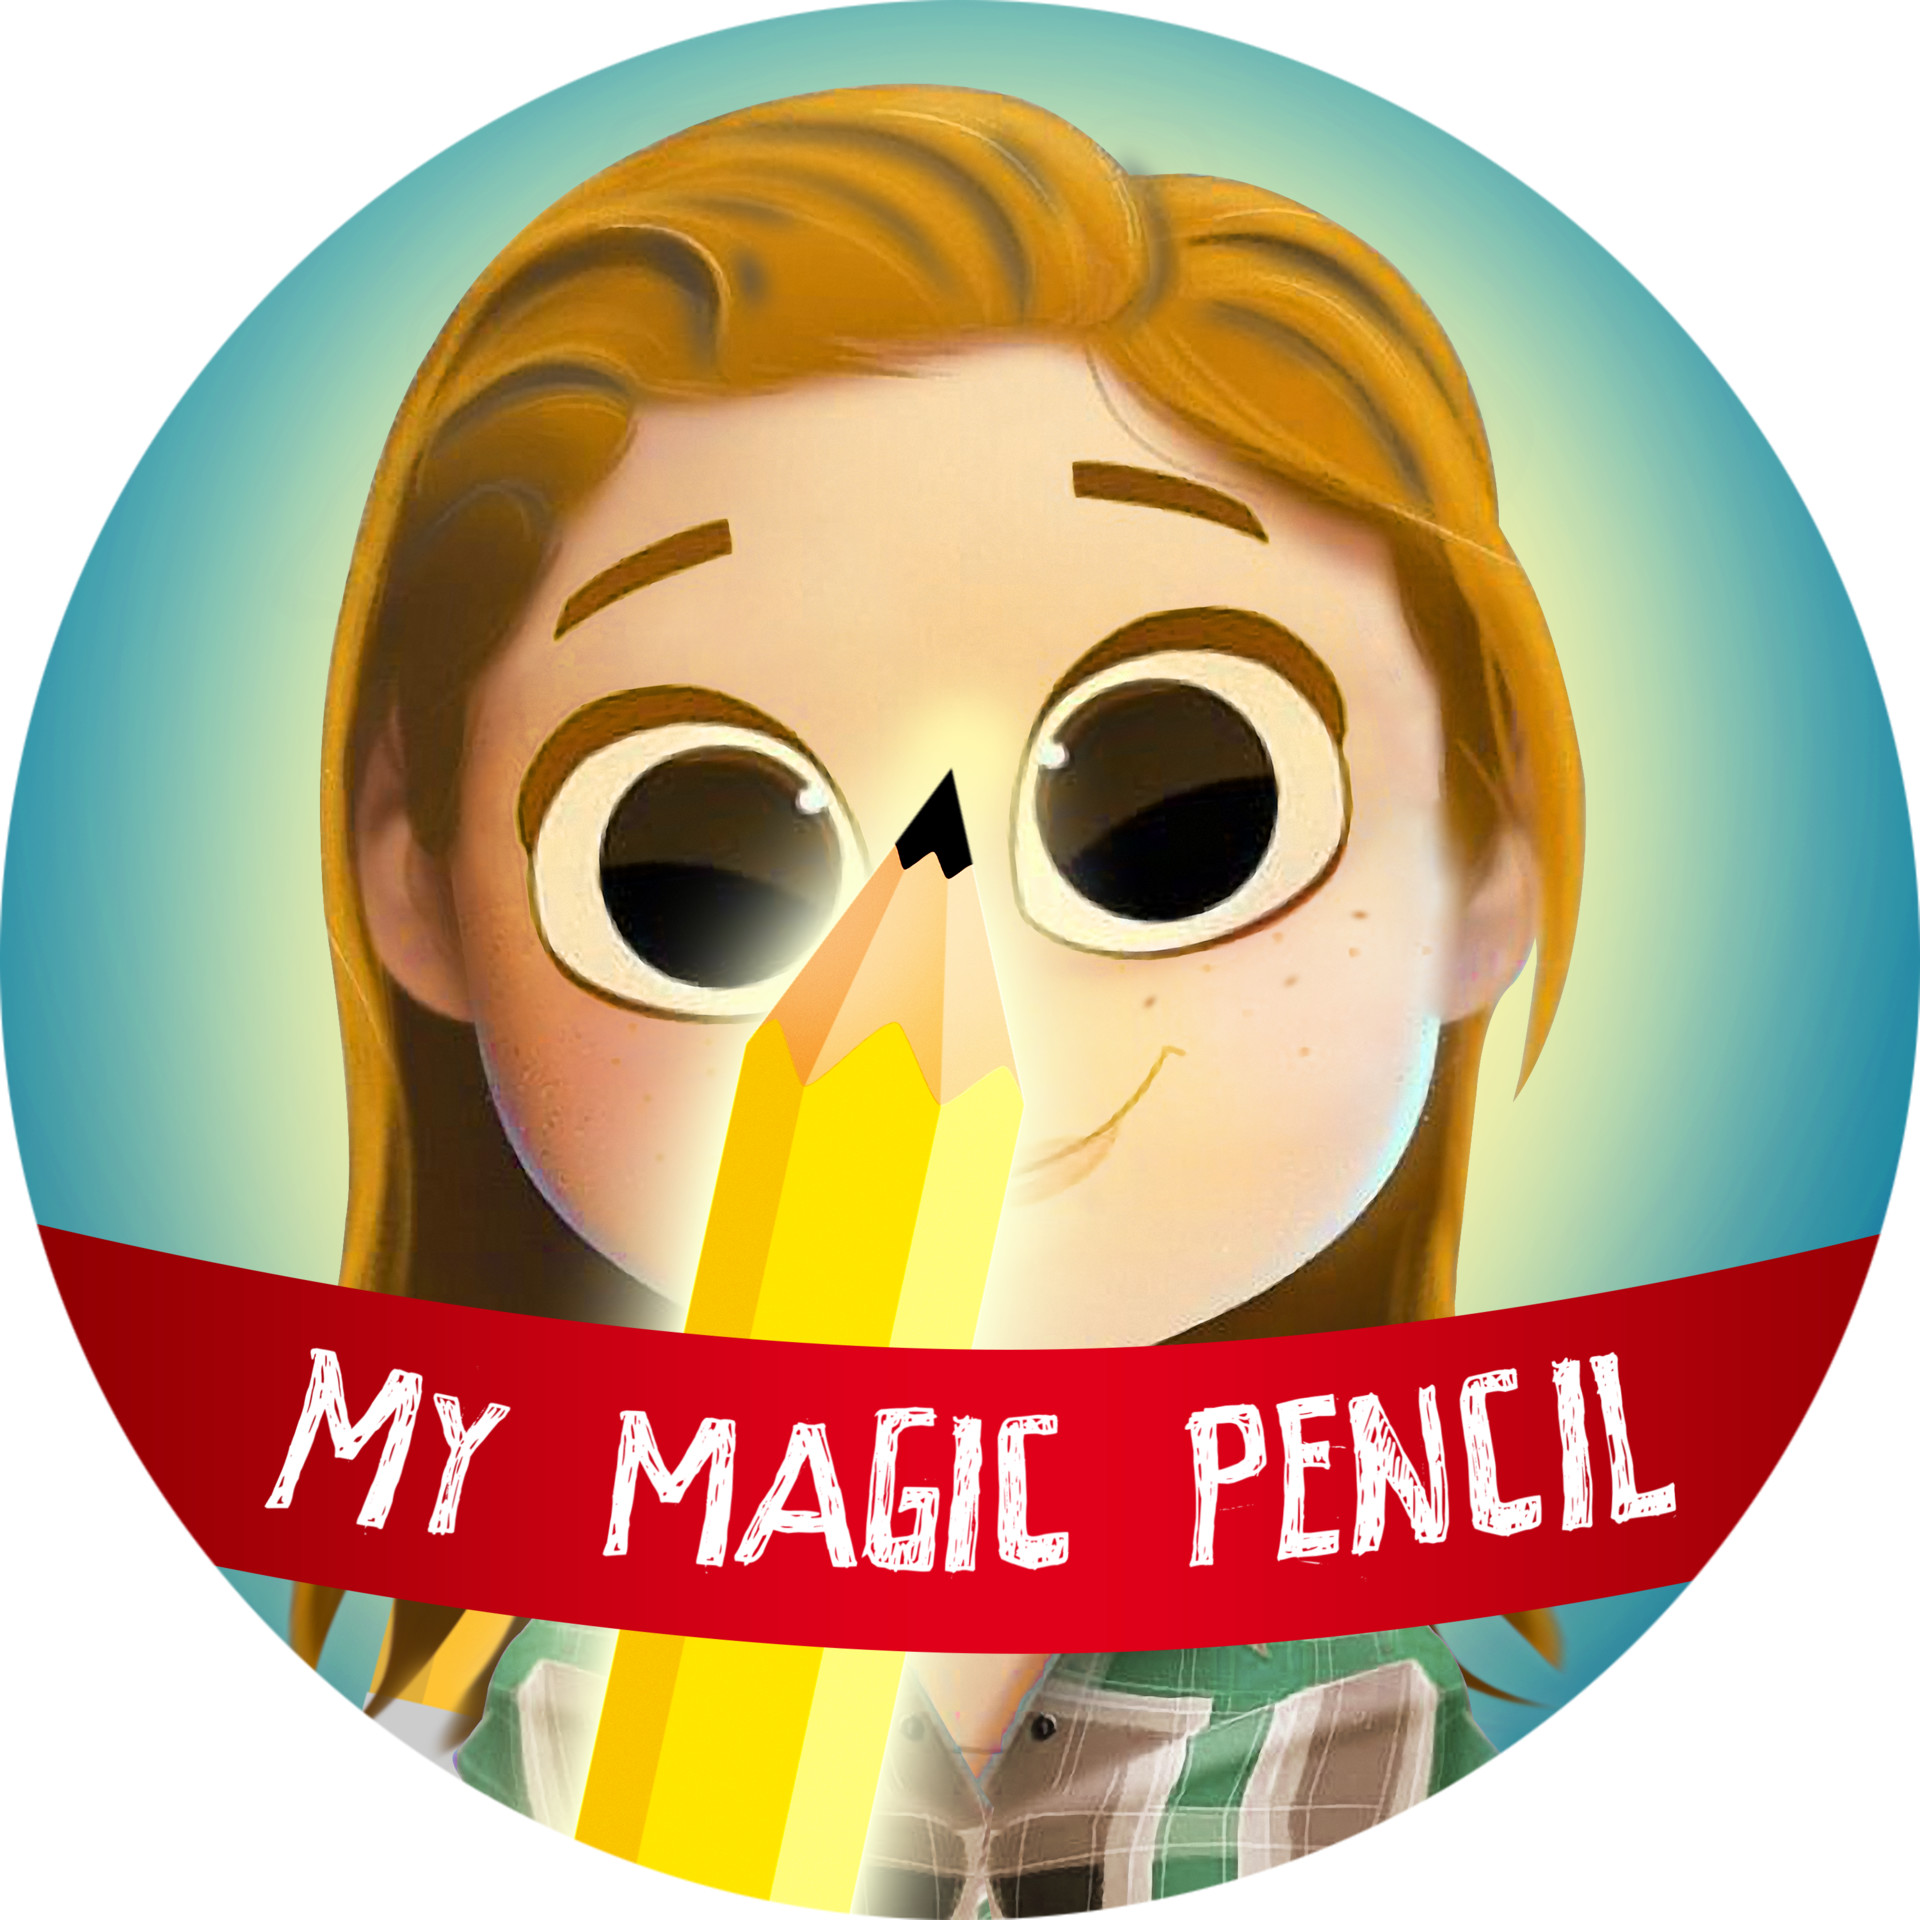 Bobby - My Magic Pencil YouTube Channel